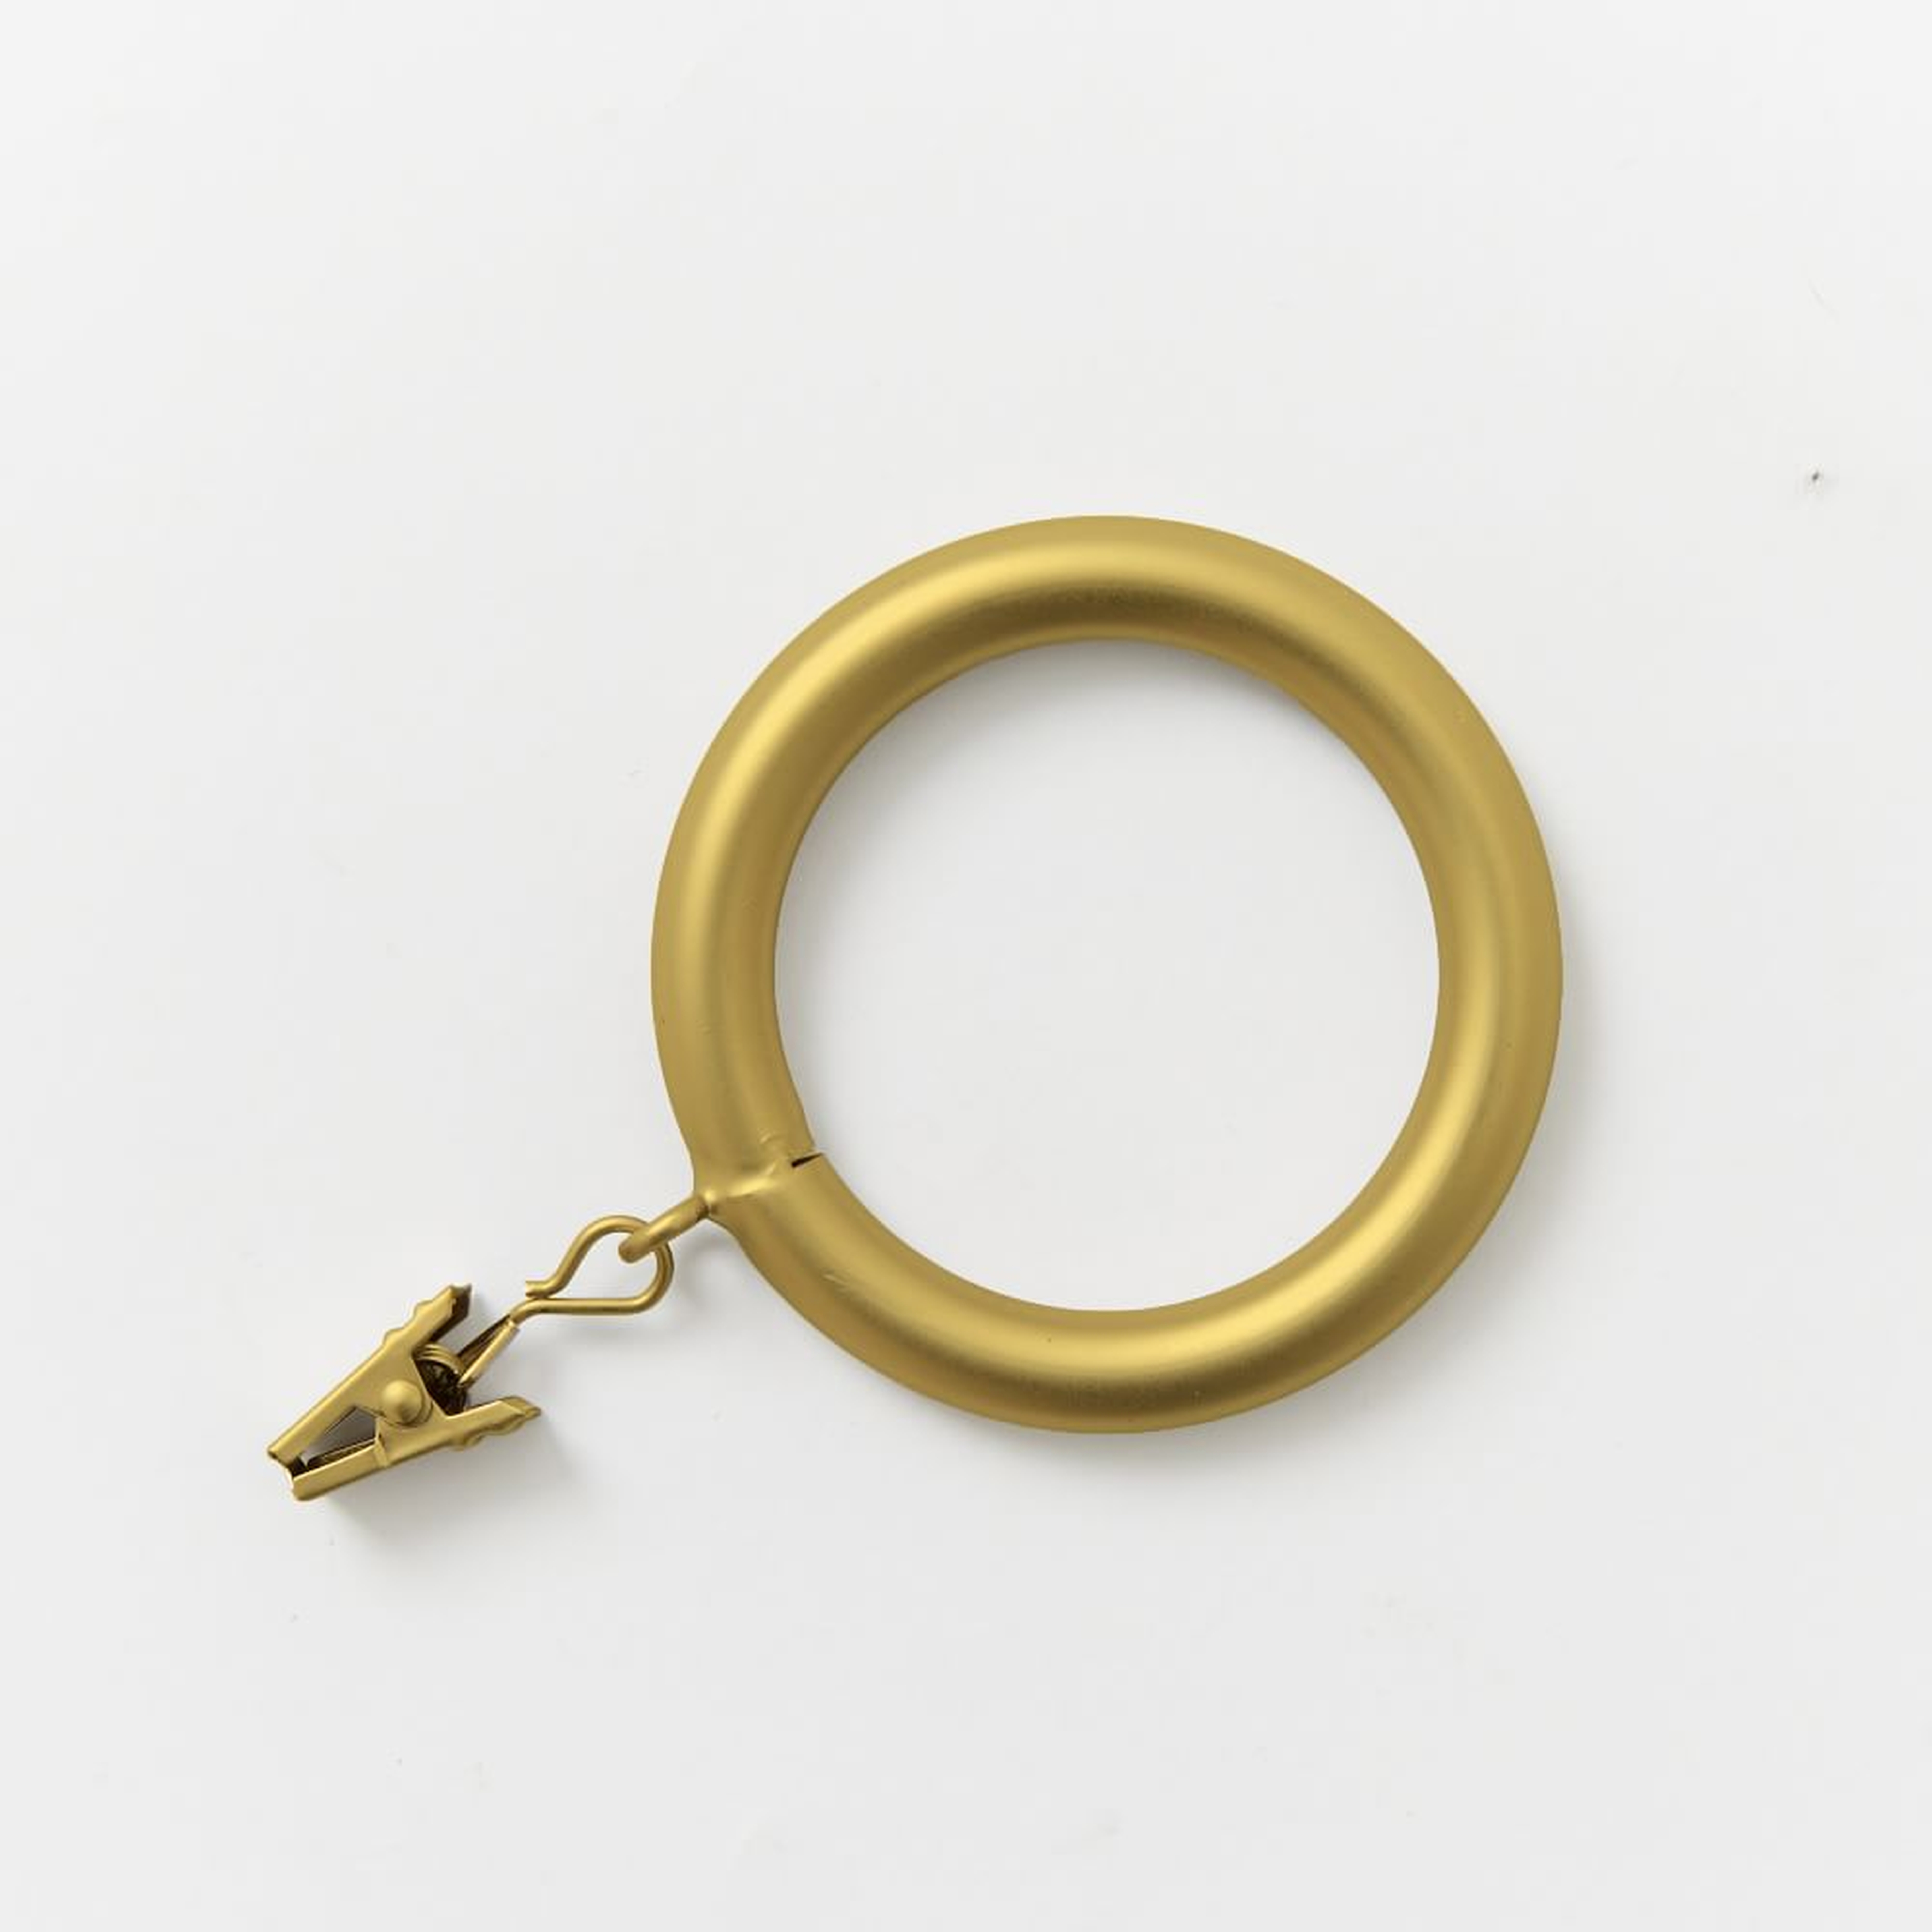 Oversized Metal Curtain Rings with Clips, Antique Brass, Set of 7 - West Elm